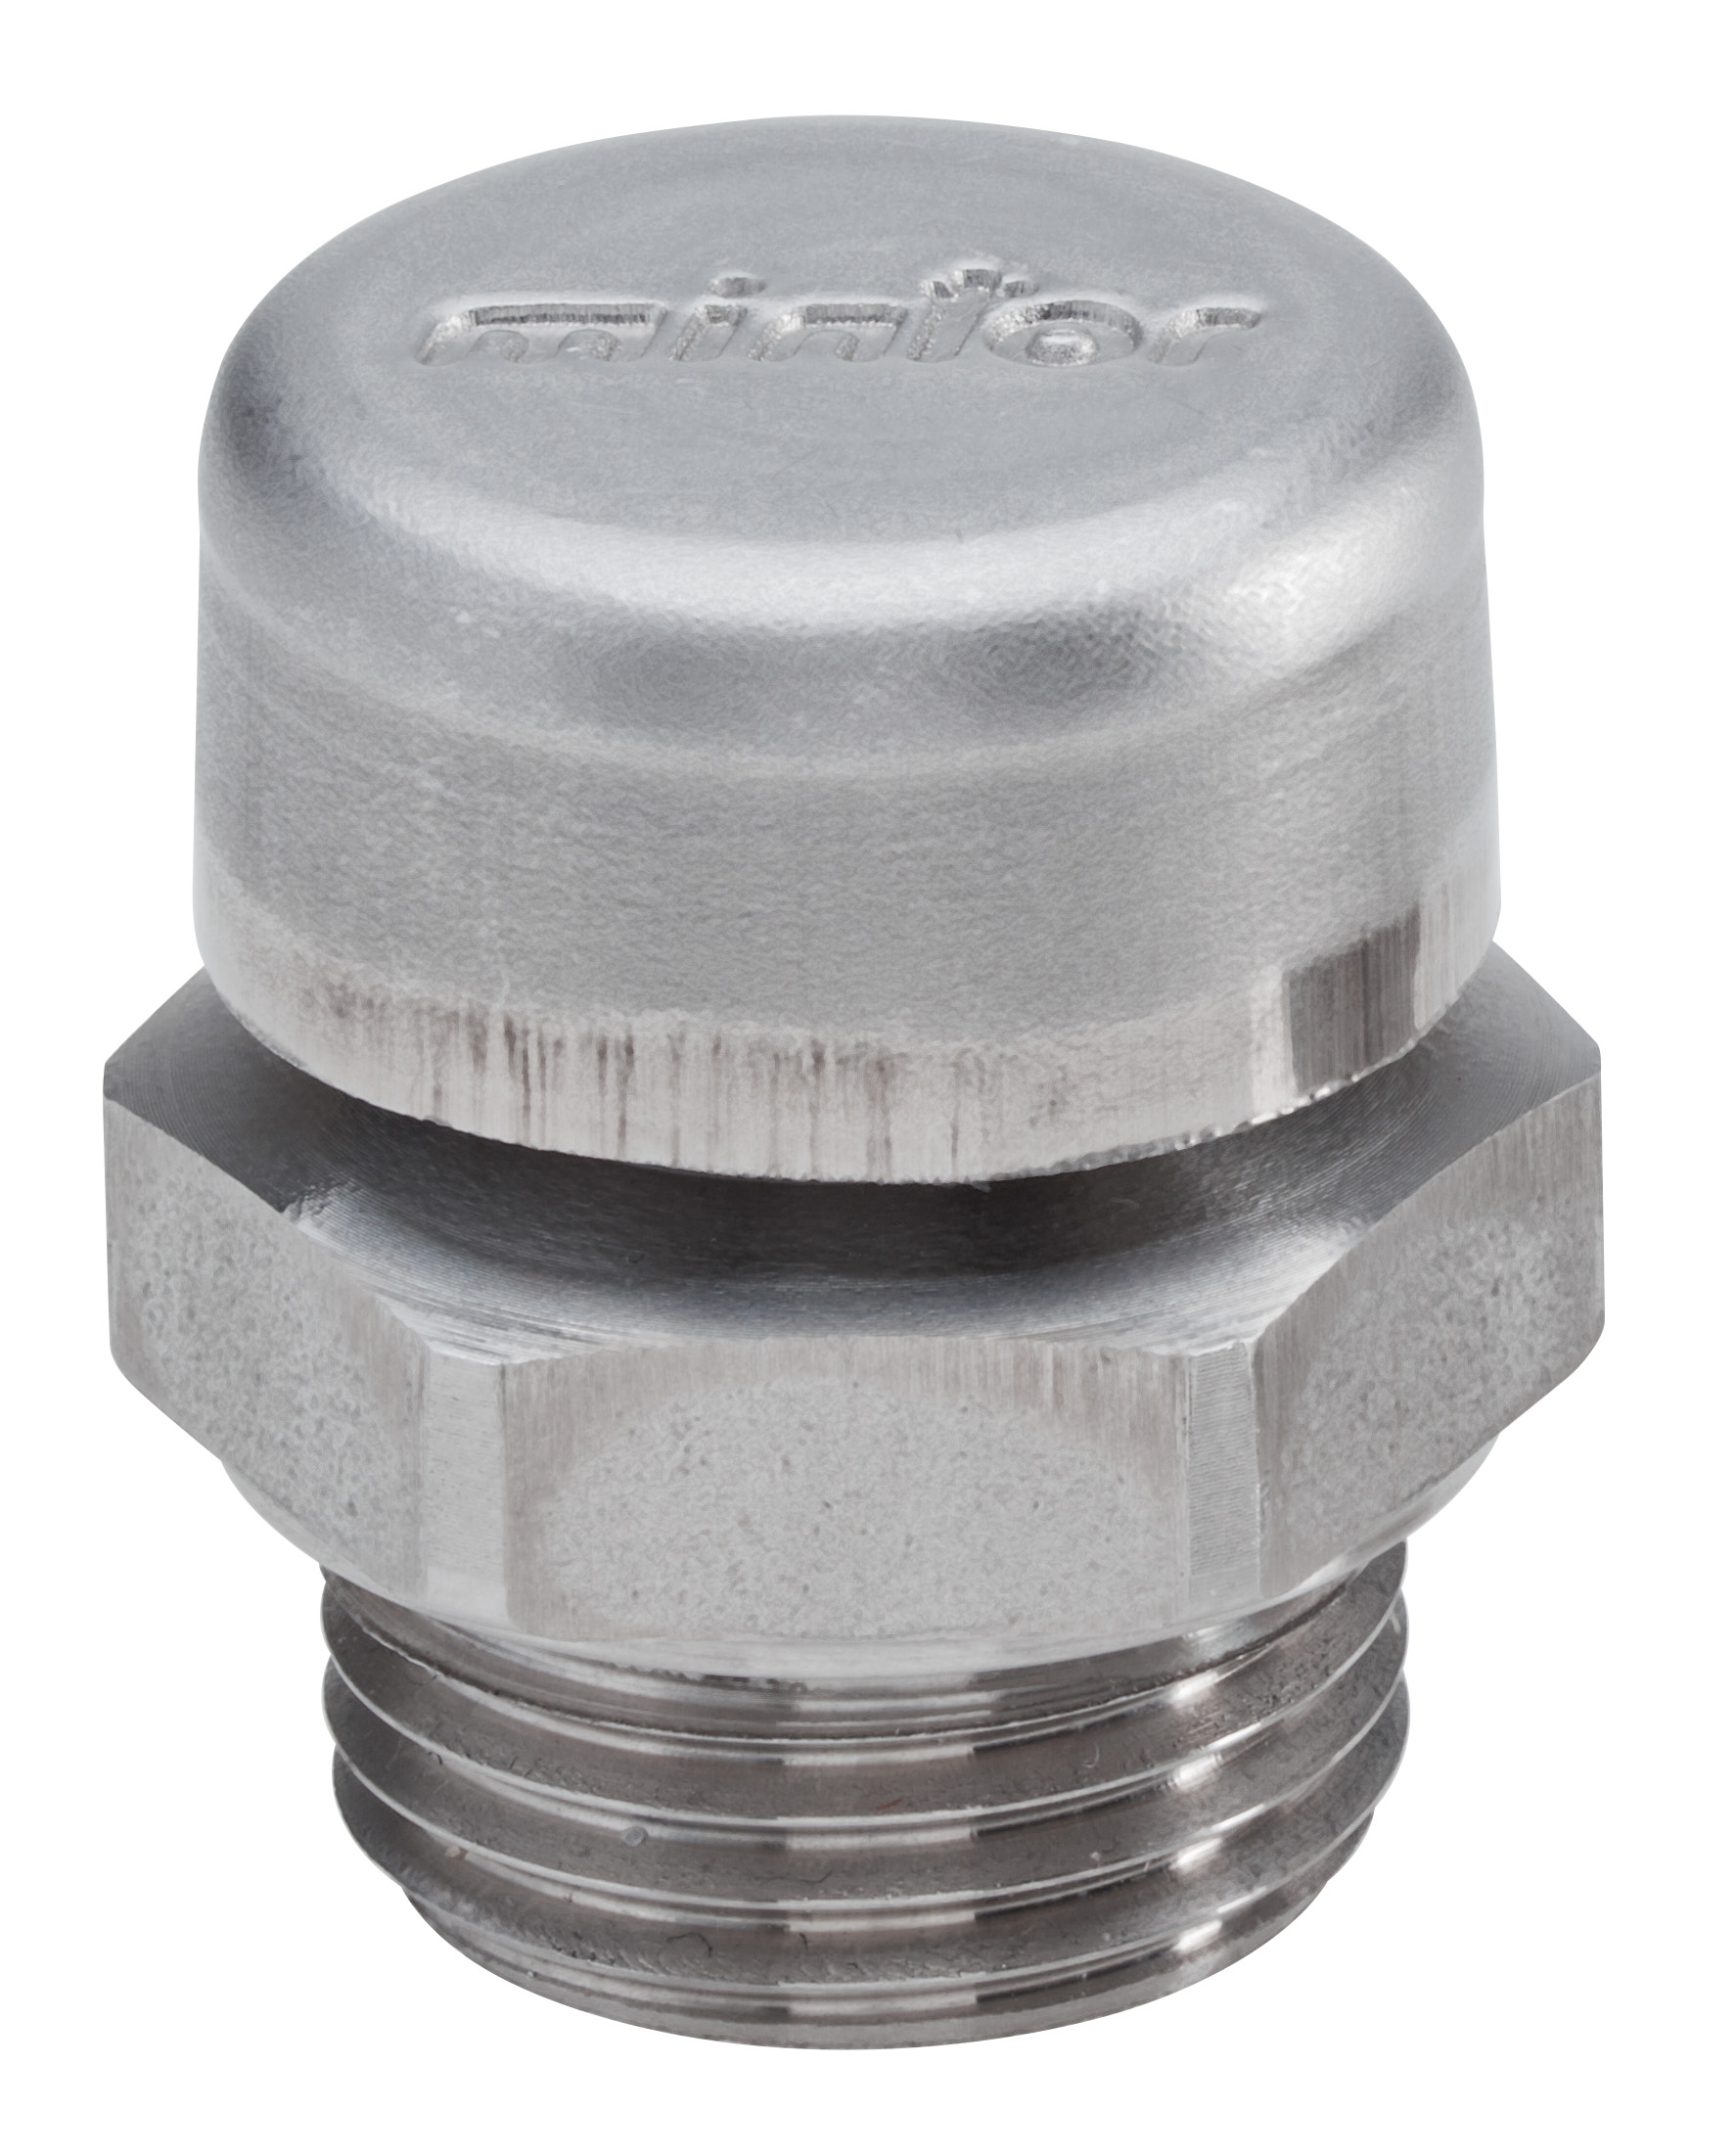 TSF INOX <p><strong>Oil filling plug with breather</strong> - Mintor Srl